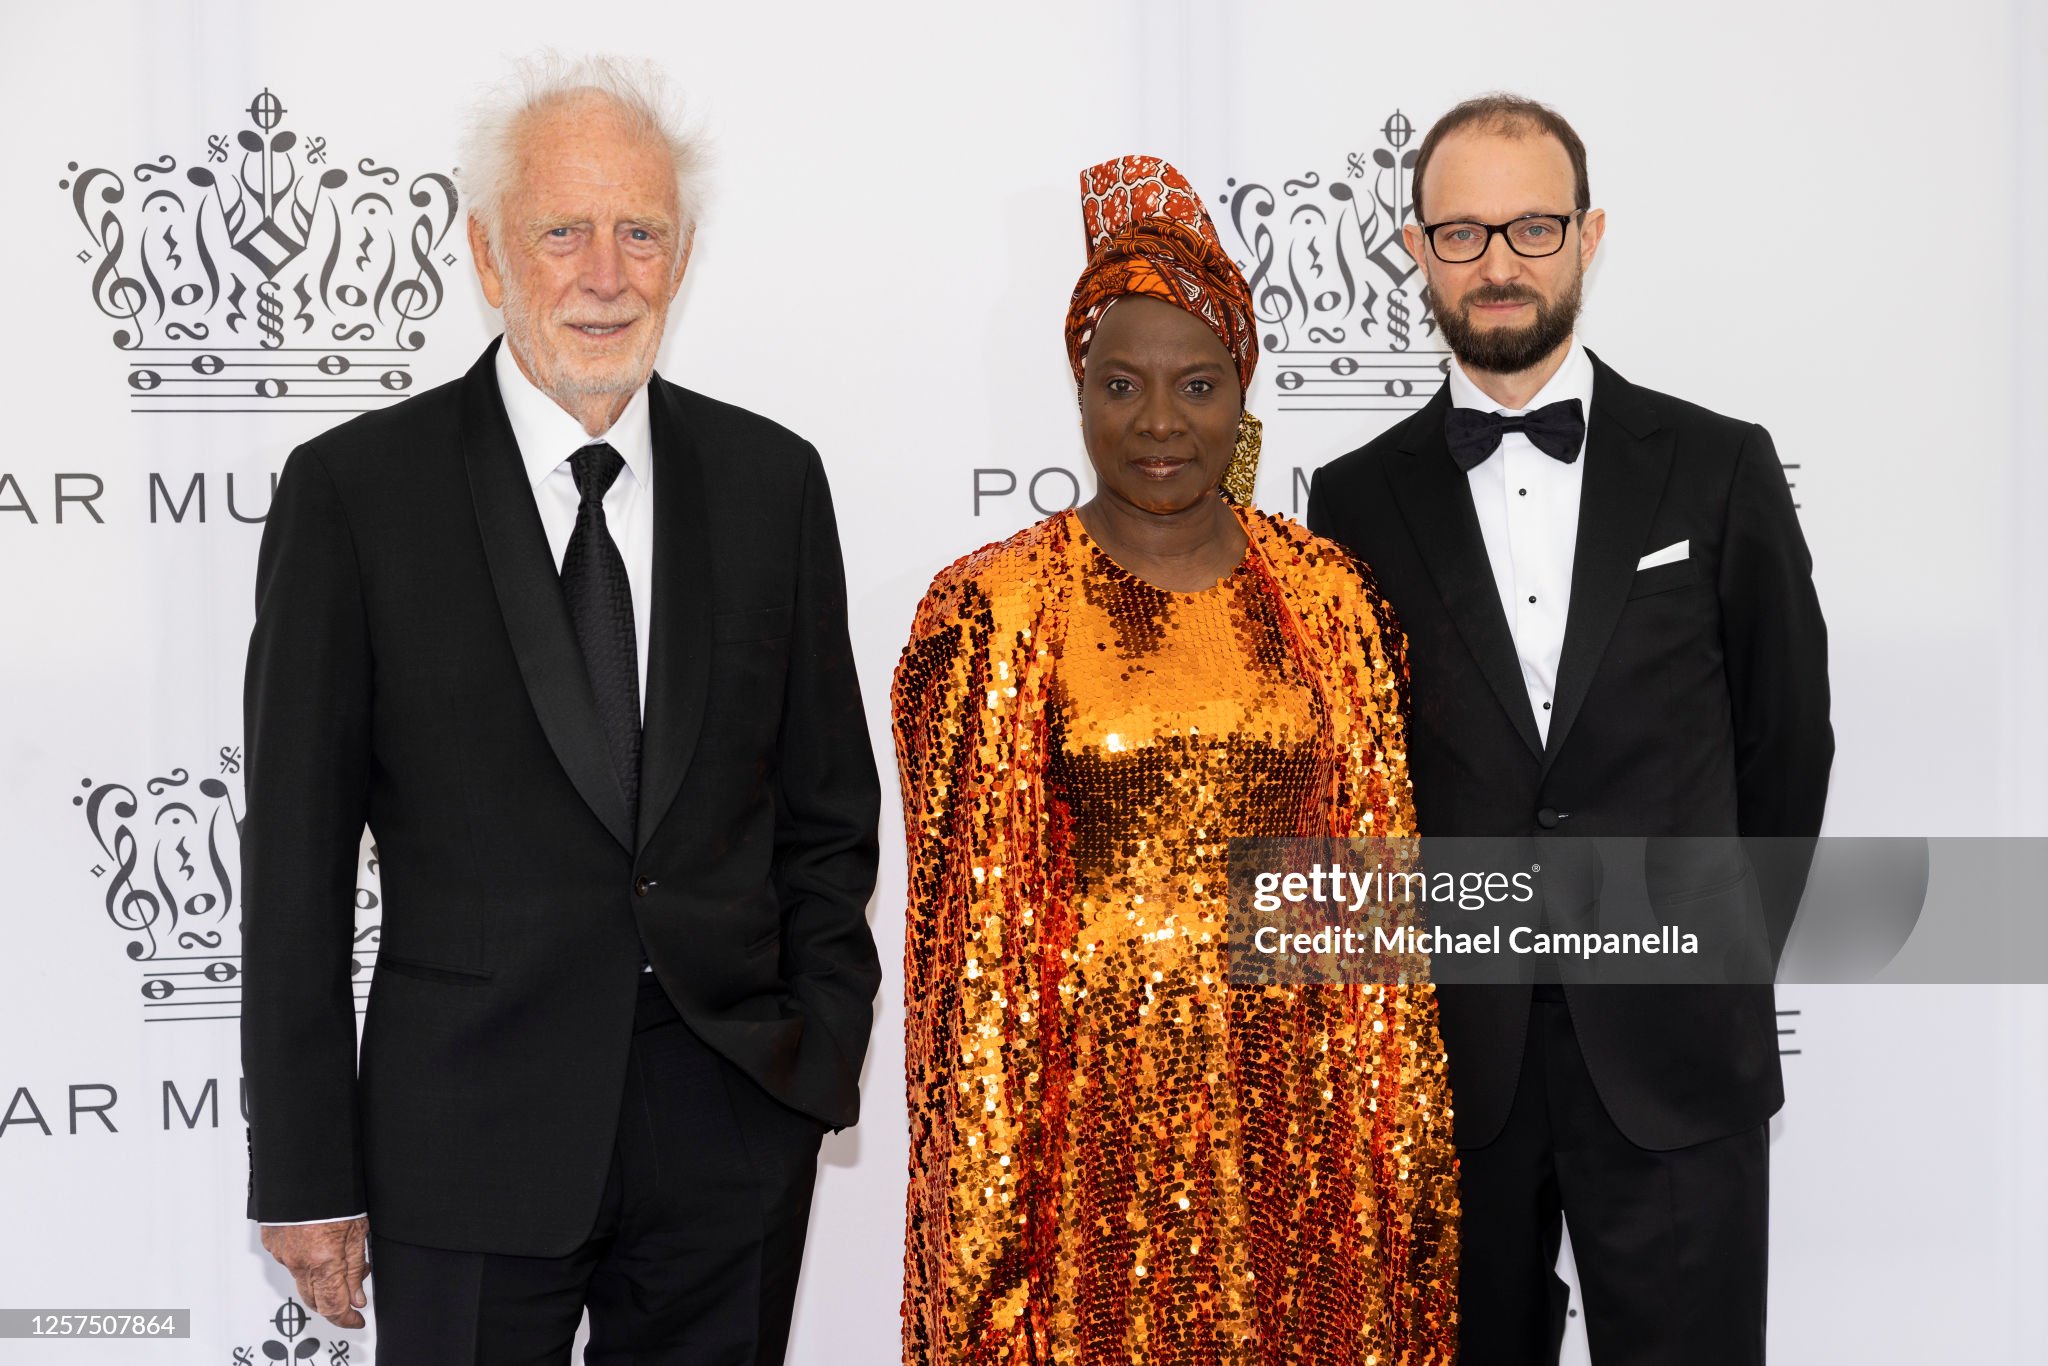 2023-polar-prize-laureates-chris-blackwell-ang%C3%A9lique-kidjo-and-michael-part-pose-for-a-picture.jpg